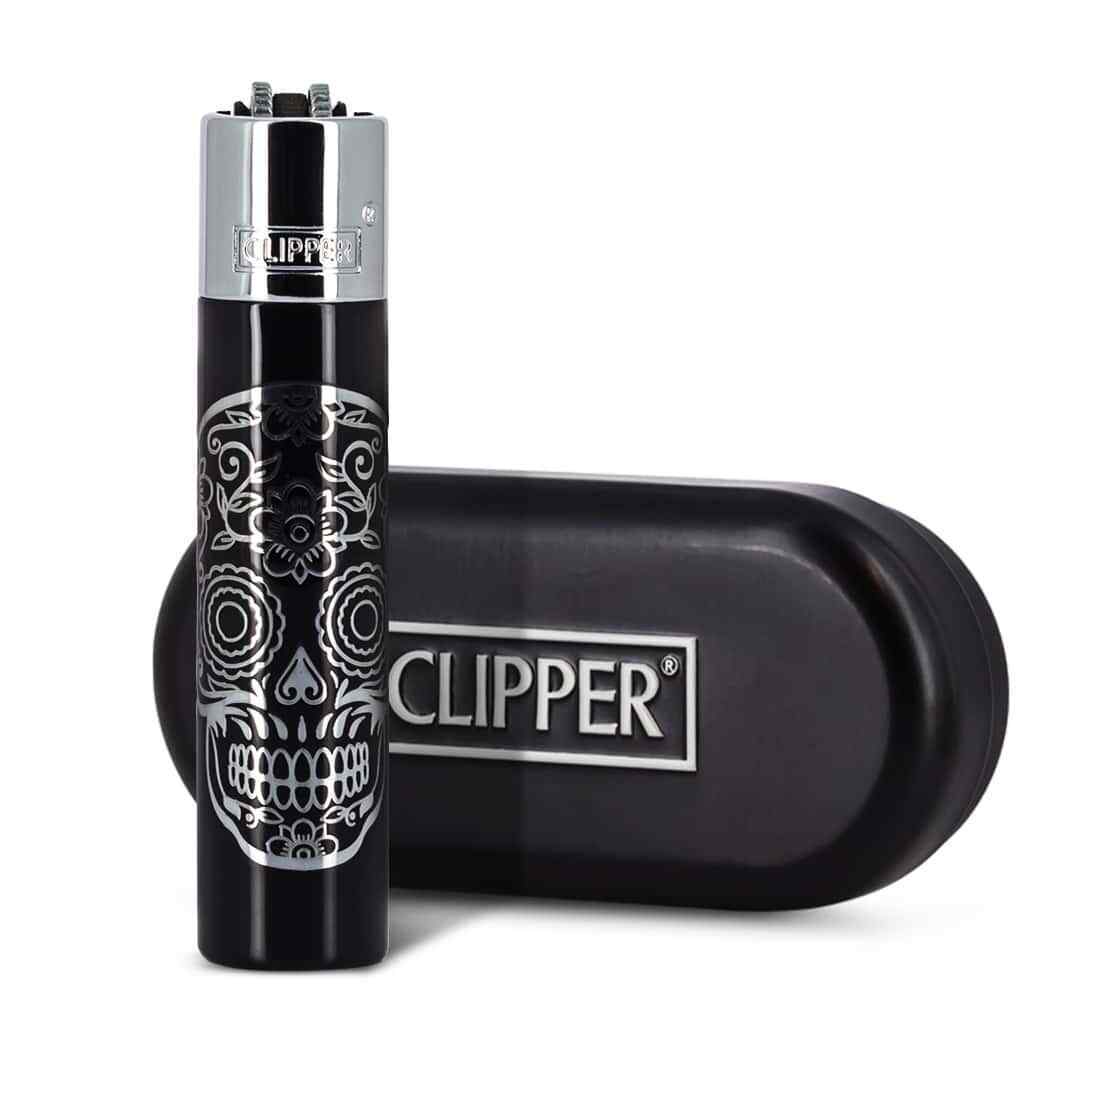 1 x Clipper ( Mex Skulls ) Full Size Refillable Metal Lighter Gold or Silver 